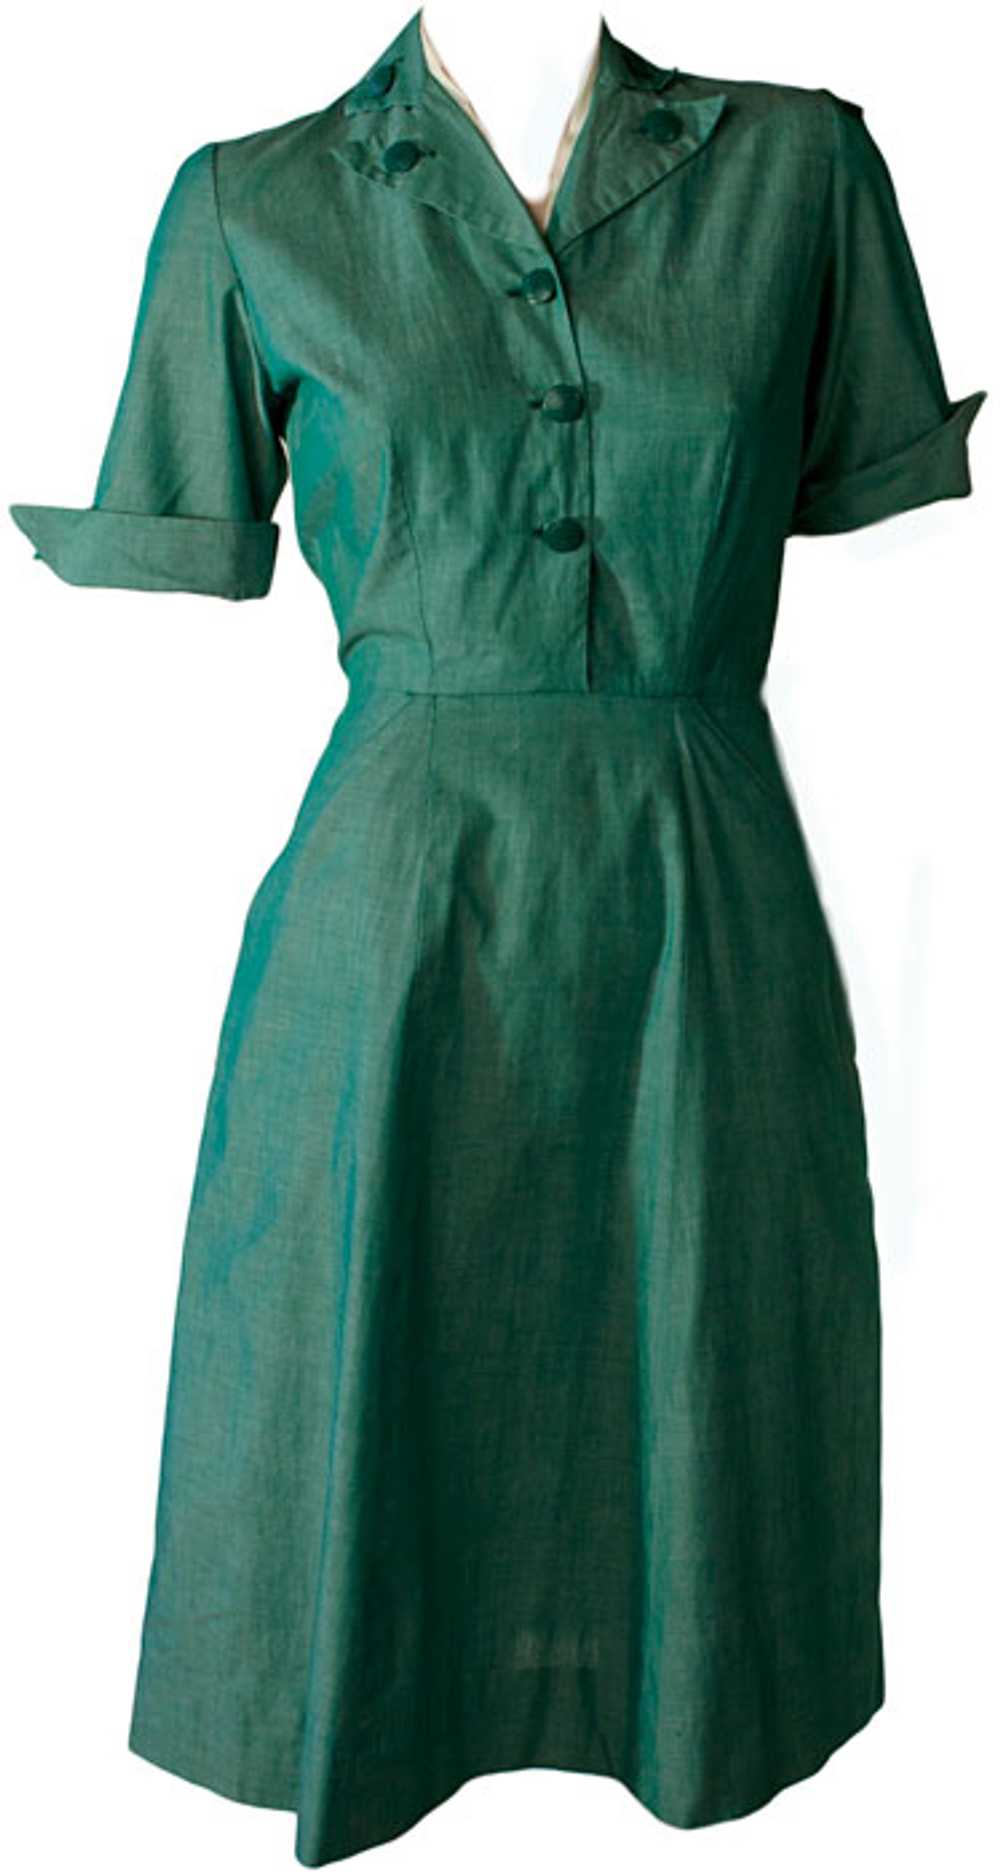 1950s Girl Scout Uniform Dress and Jacket - image 5